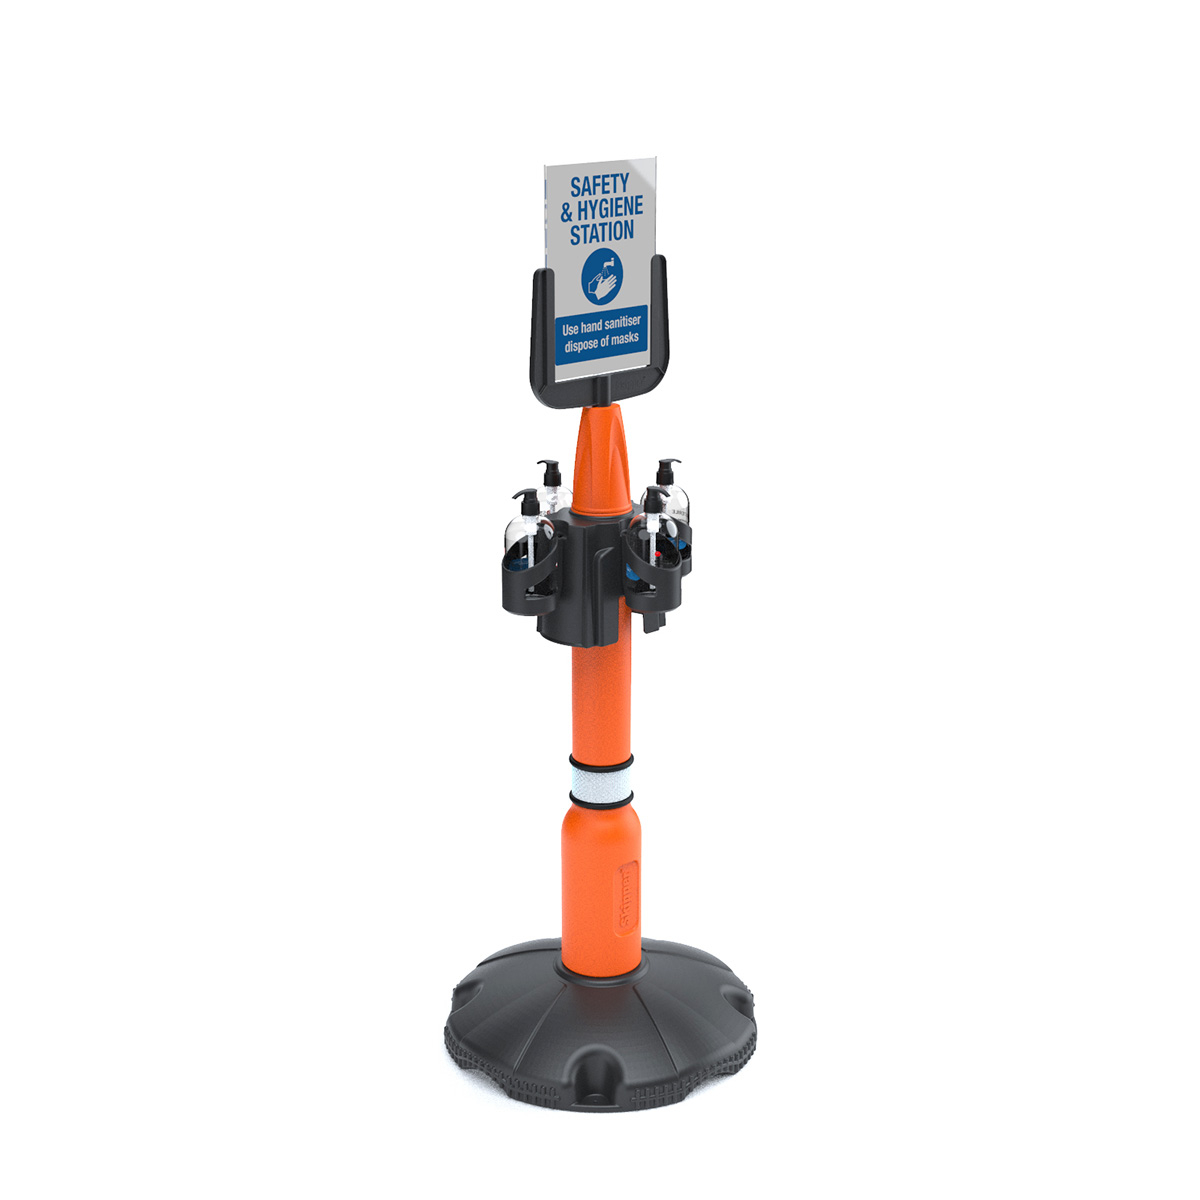 Skipper Hygiene And Safety Station With Orange Post - Freestanding Hygiene Station Can be Used in High-Traffic Locations For Dispensing Hand Gel